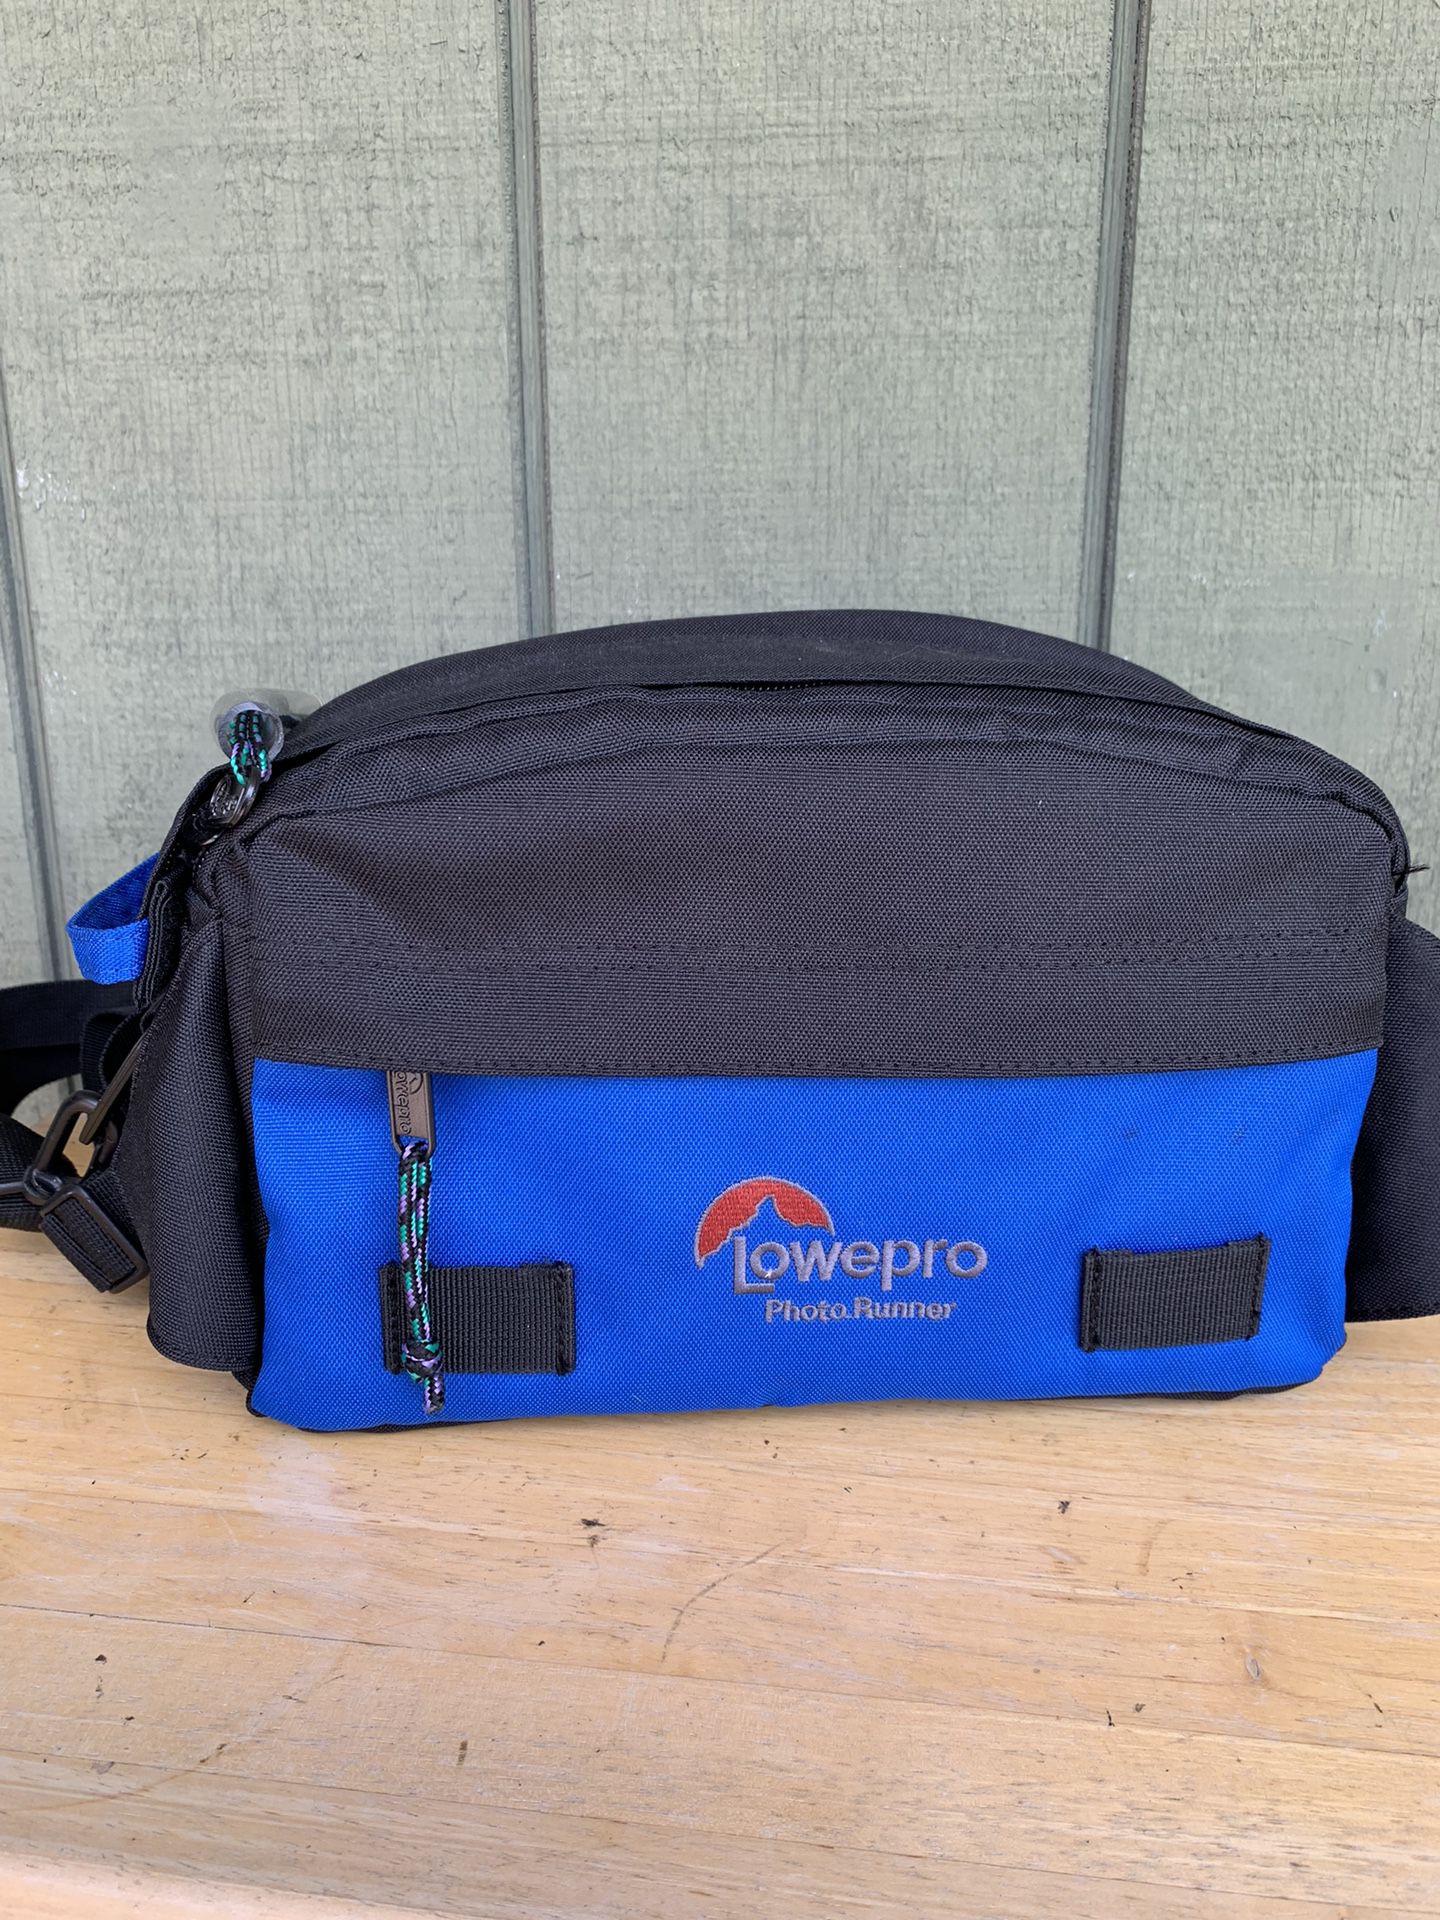 LowePro Photo Runner Camera Bag For Over the Shoulder Or Around The Waist  for Sale in West Covina, CA - OfferUp